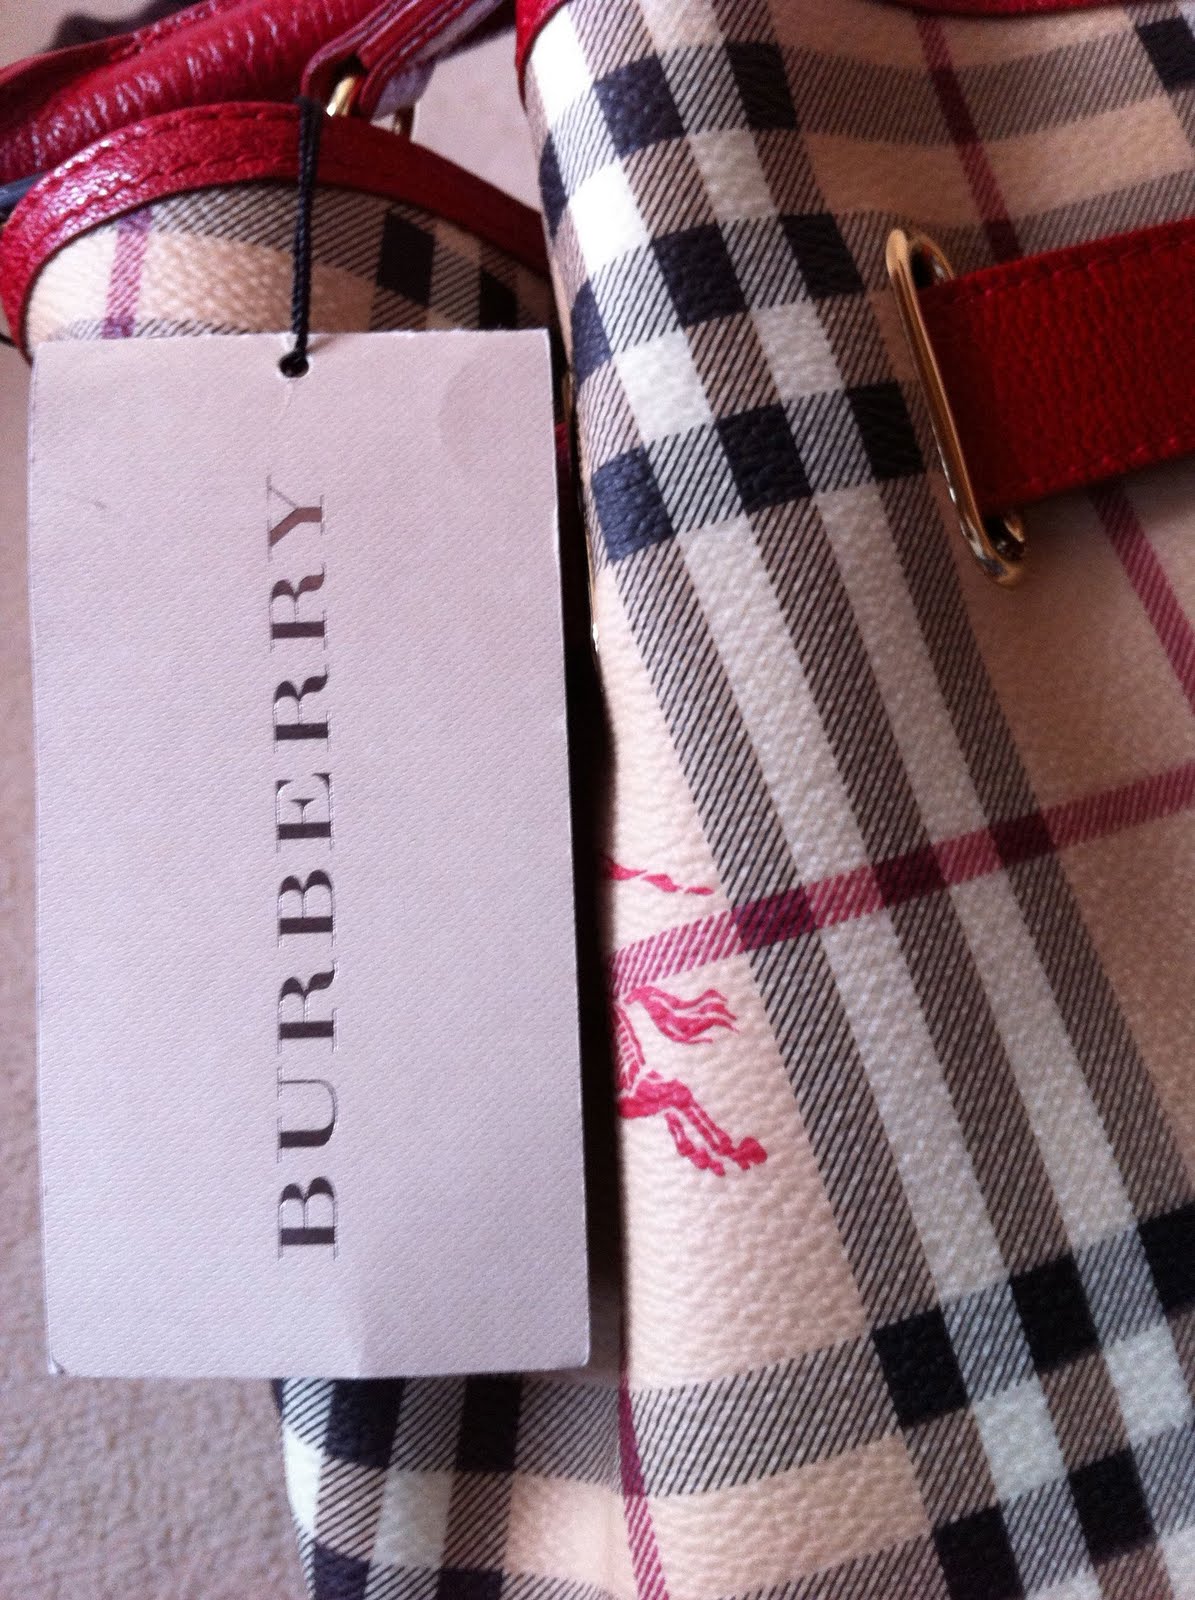 Discounted Genuine Handbags: (New) Authentic Burberry Hobo Bag For Sale